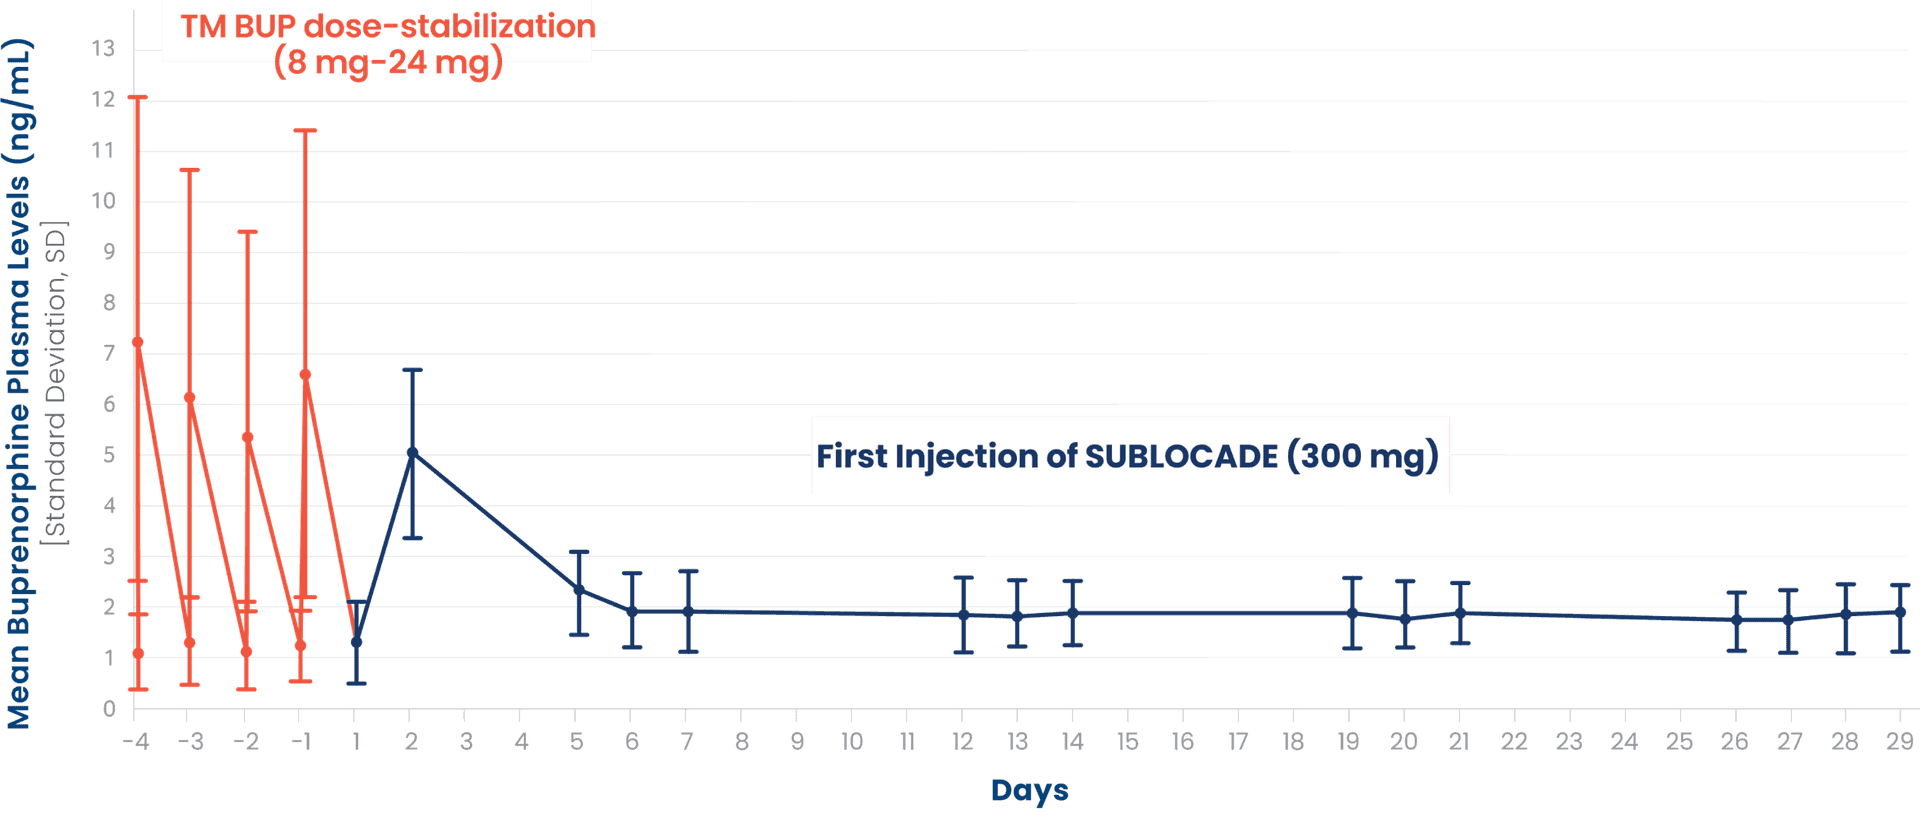 Mean buprenorphine levels during transmucosal buprenorphine (TM BUP) dose-stabilization and after first injection of SUBLOCADE graph